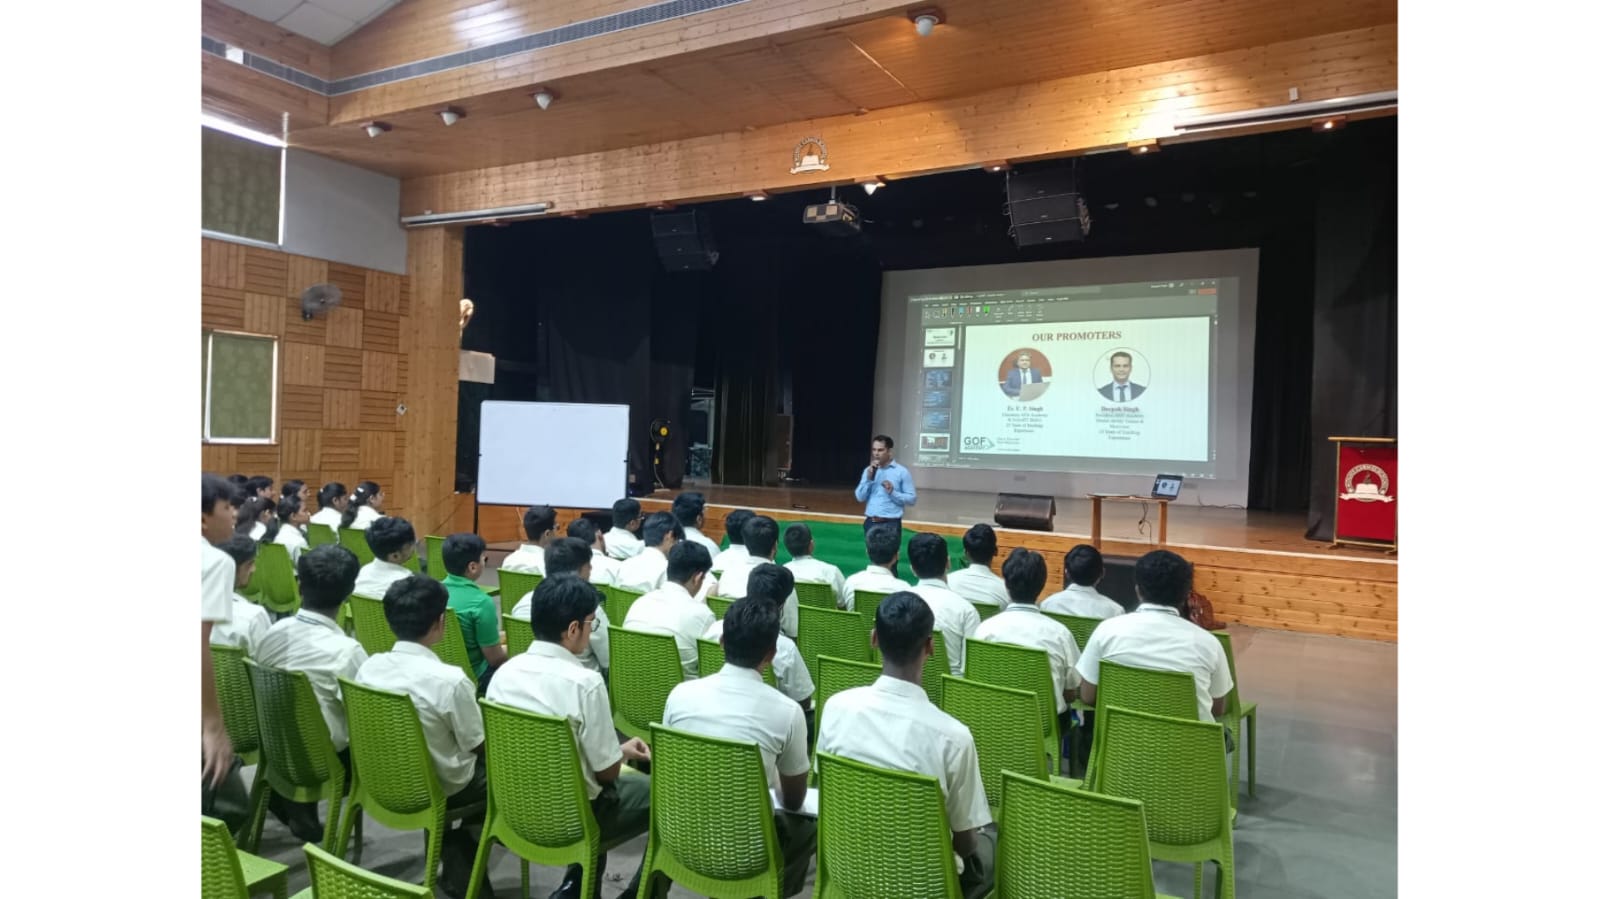 CUET and CLAT seminar for the students of class 11th and 12th at Mount Carmel School Dwarka